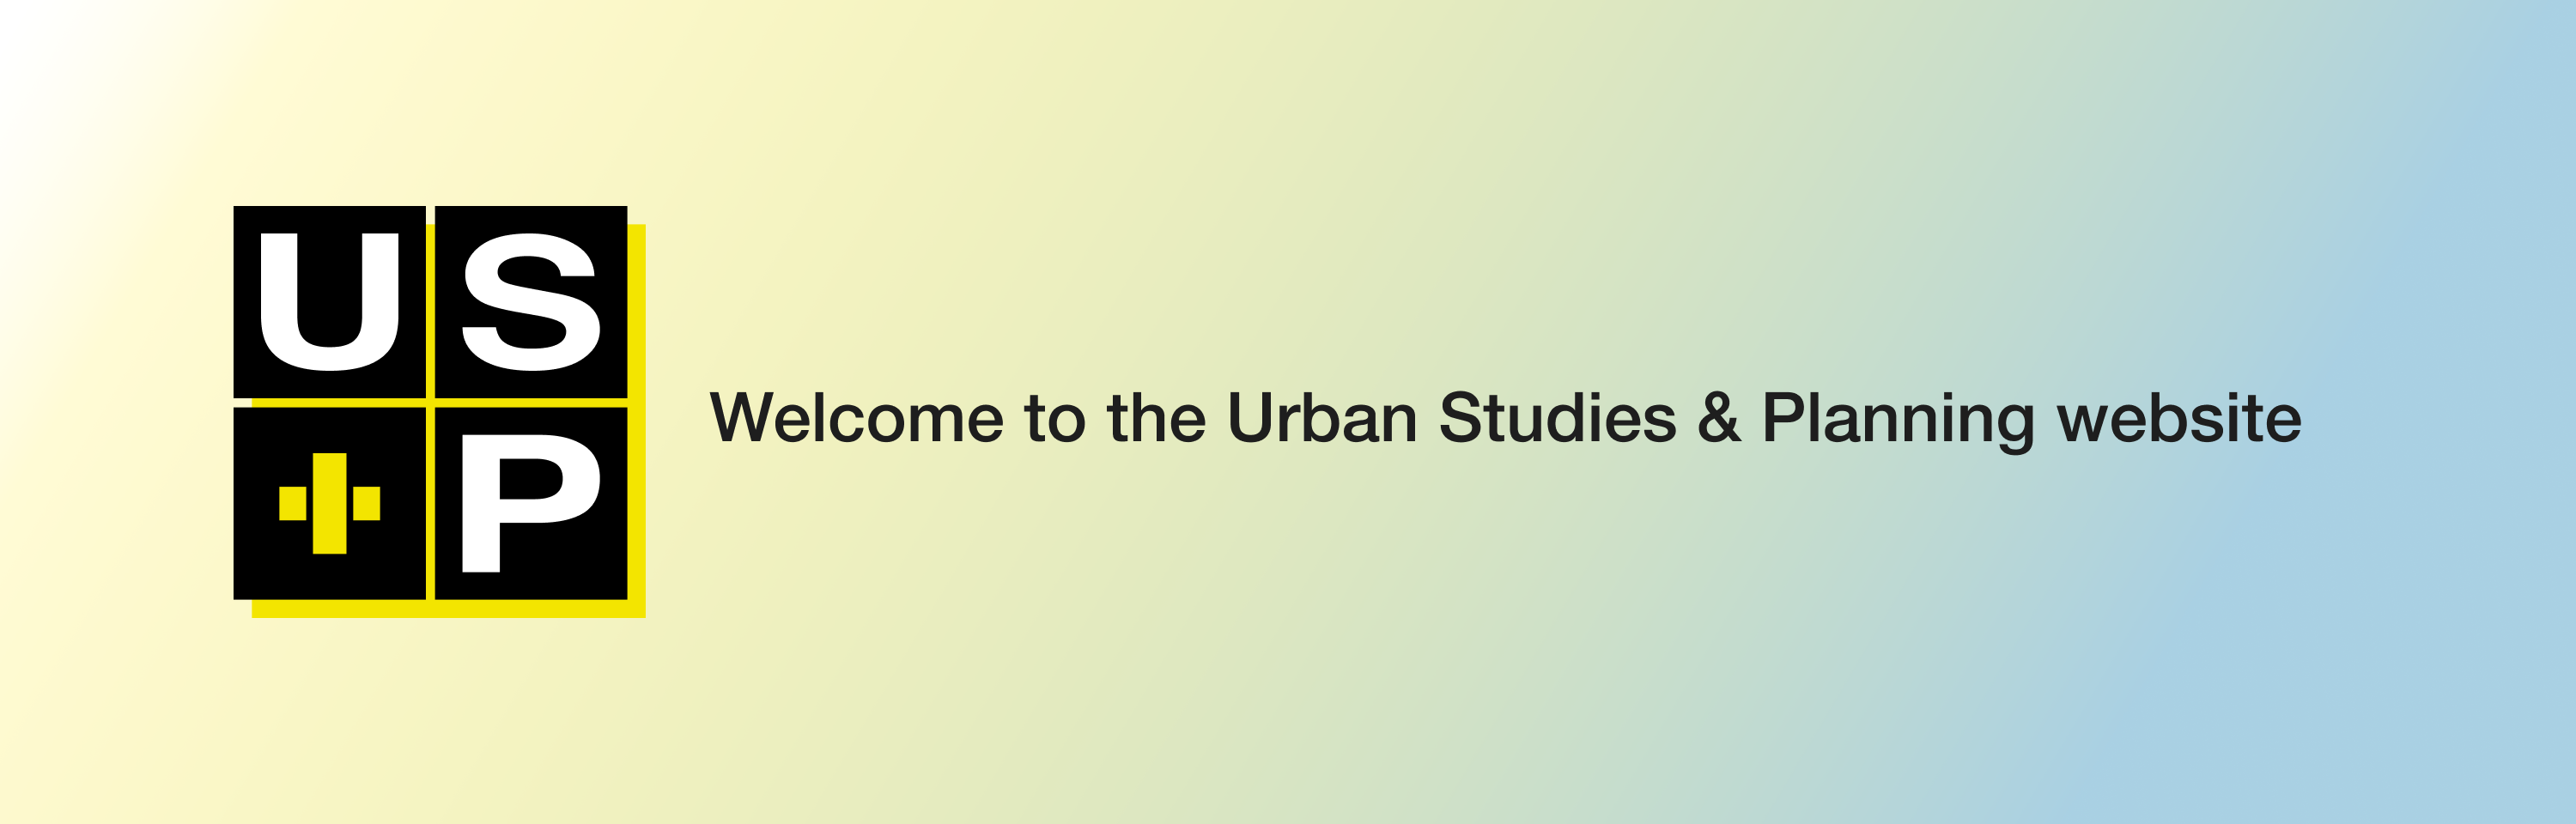 Welcome to the Urban Studies and Planning Website